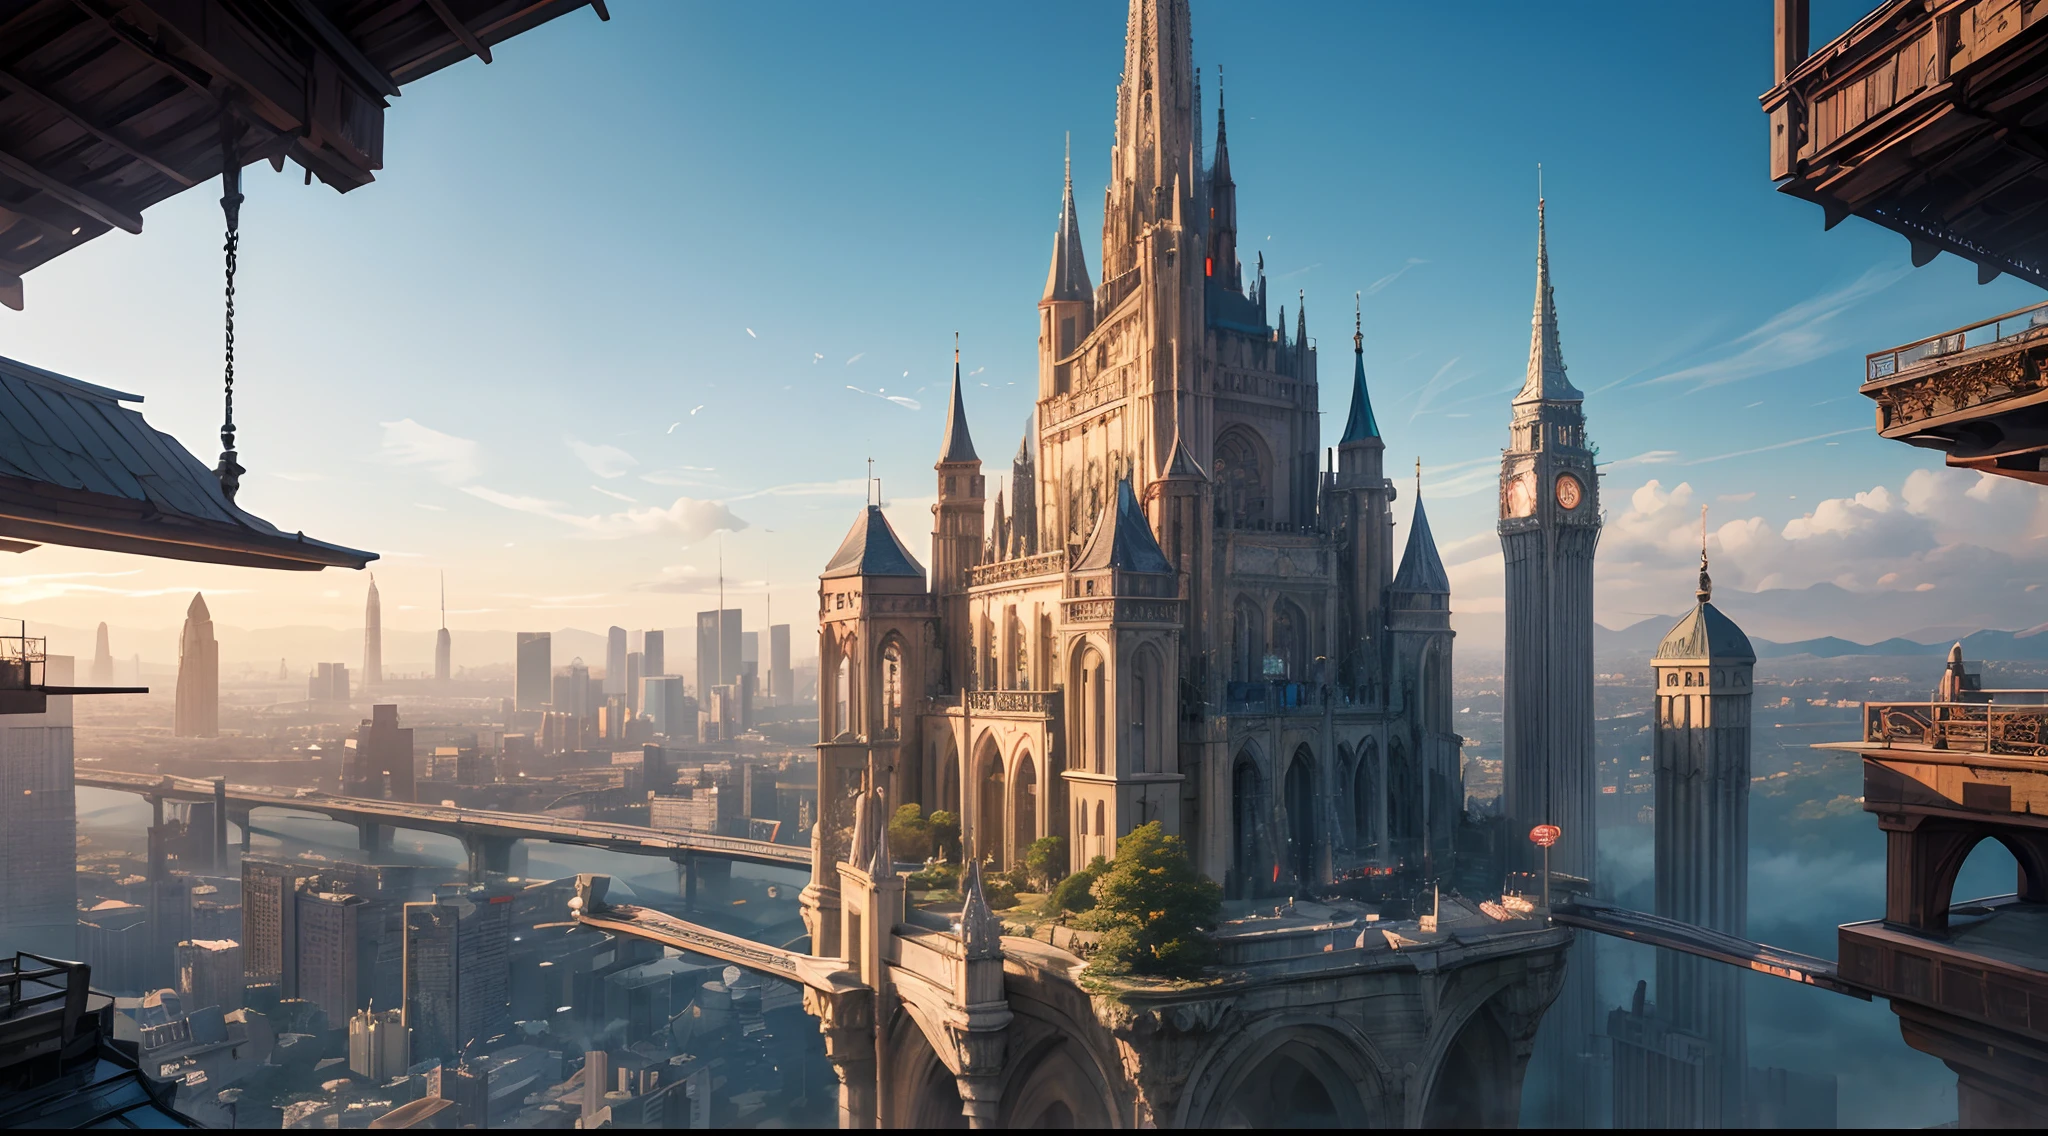 (best quality,4k,8k,highres,masterpiece:1.2),ultra-detailed,(realistic,photorealistic,photo-realistic:1.37),huge castles,skyscrapers floating in the sky,utopia,top quality fantasy,cyberpunk isekai,giants waterfall,mother nature,unimaginable,unbelievable,virtual reality,oasis of serenity,colorful neon lights,futuristic technology,vibrant cityscape,awe-inspiring architecture,unlimited possibilities,mesmerizing view,ethereal atmosphere,enchanting environment,majestic structures,thousands of feet high,sparkling clear water,breathtaking scenery,transcendent beauty,surreal landscape,architectural marvels,wonder of nature,harmony between man and nature,limitless imagination,urban paradise,dream-like setting,unrealistically magnificent,picture-perfect moments,serene tranquility,spellbinding aesthetic,awe-inducing skyline